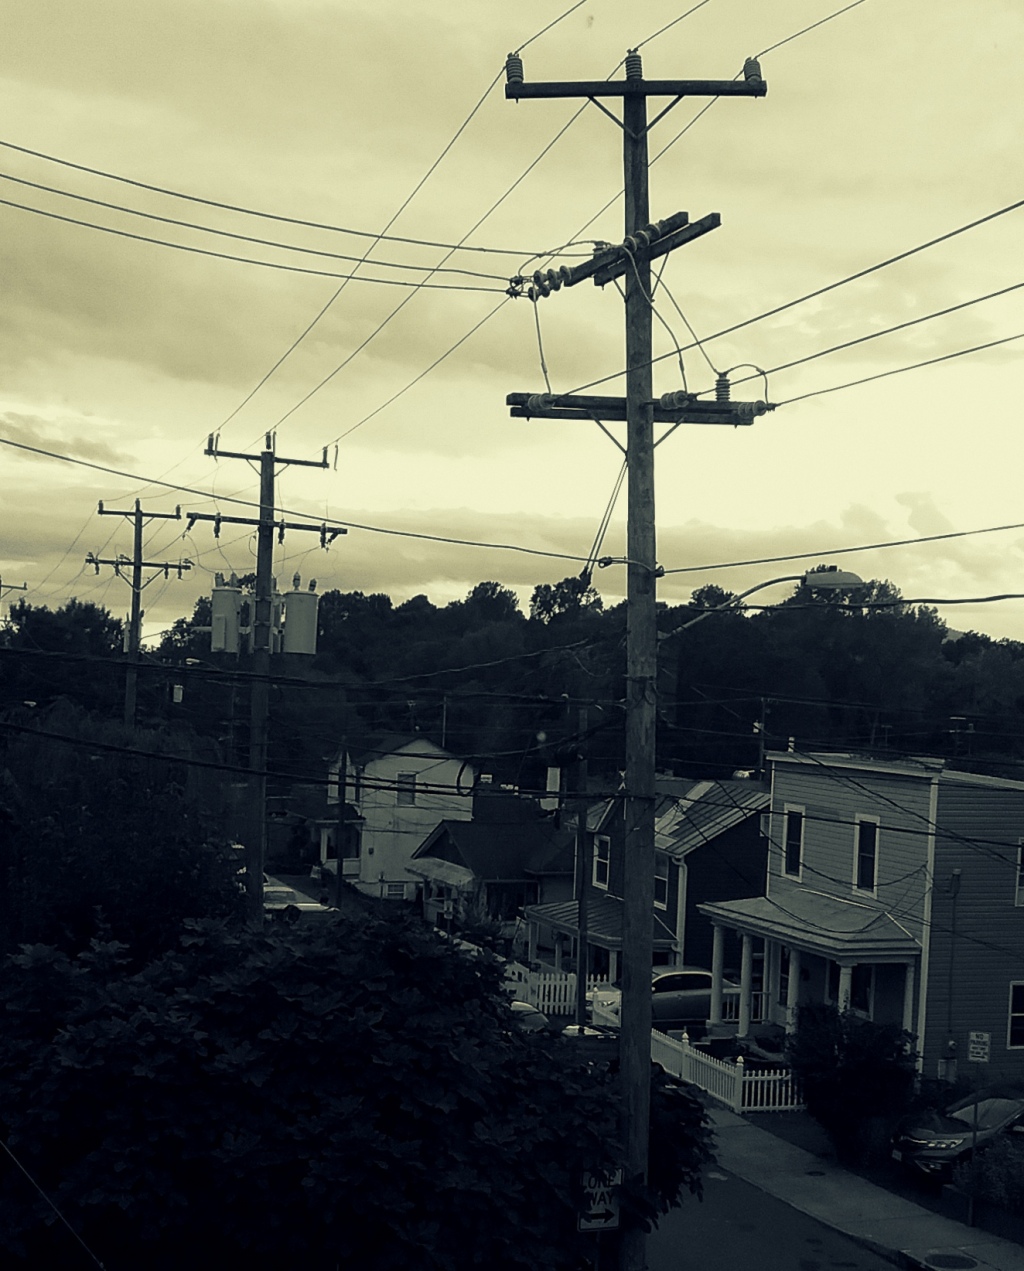 The Power Lines